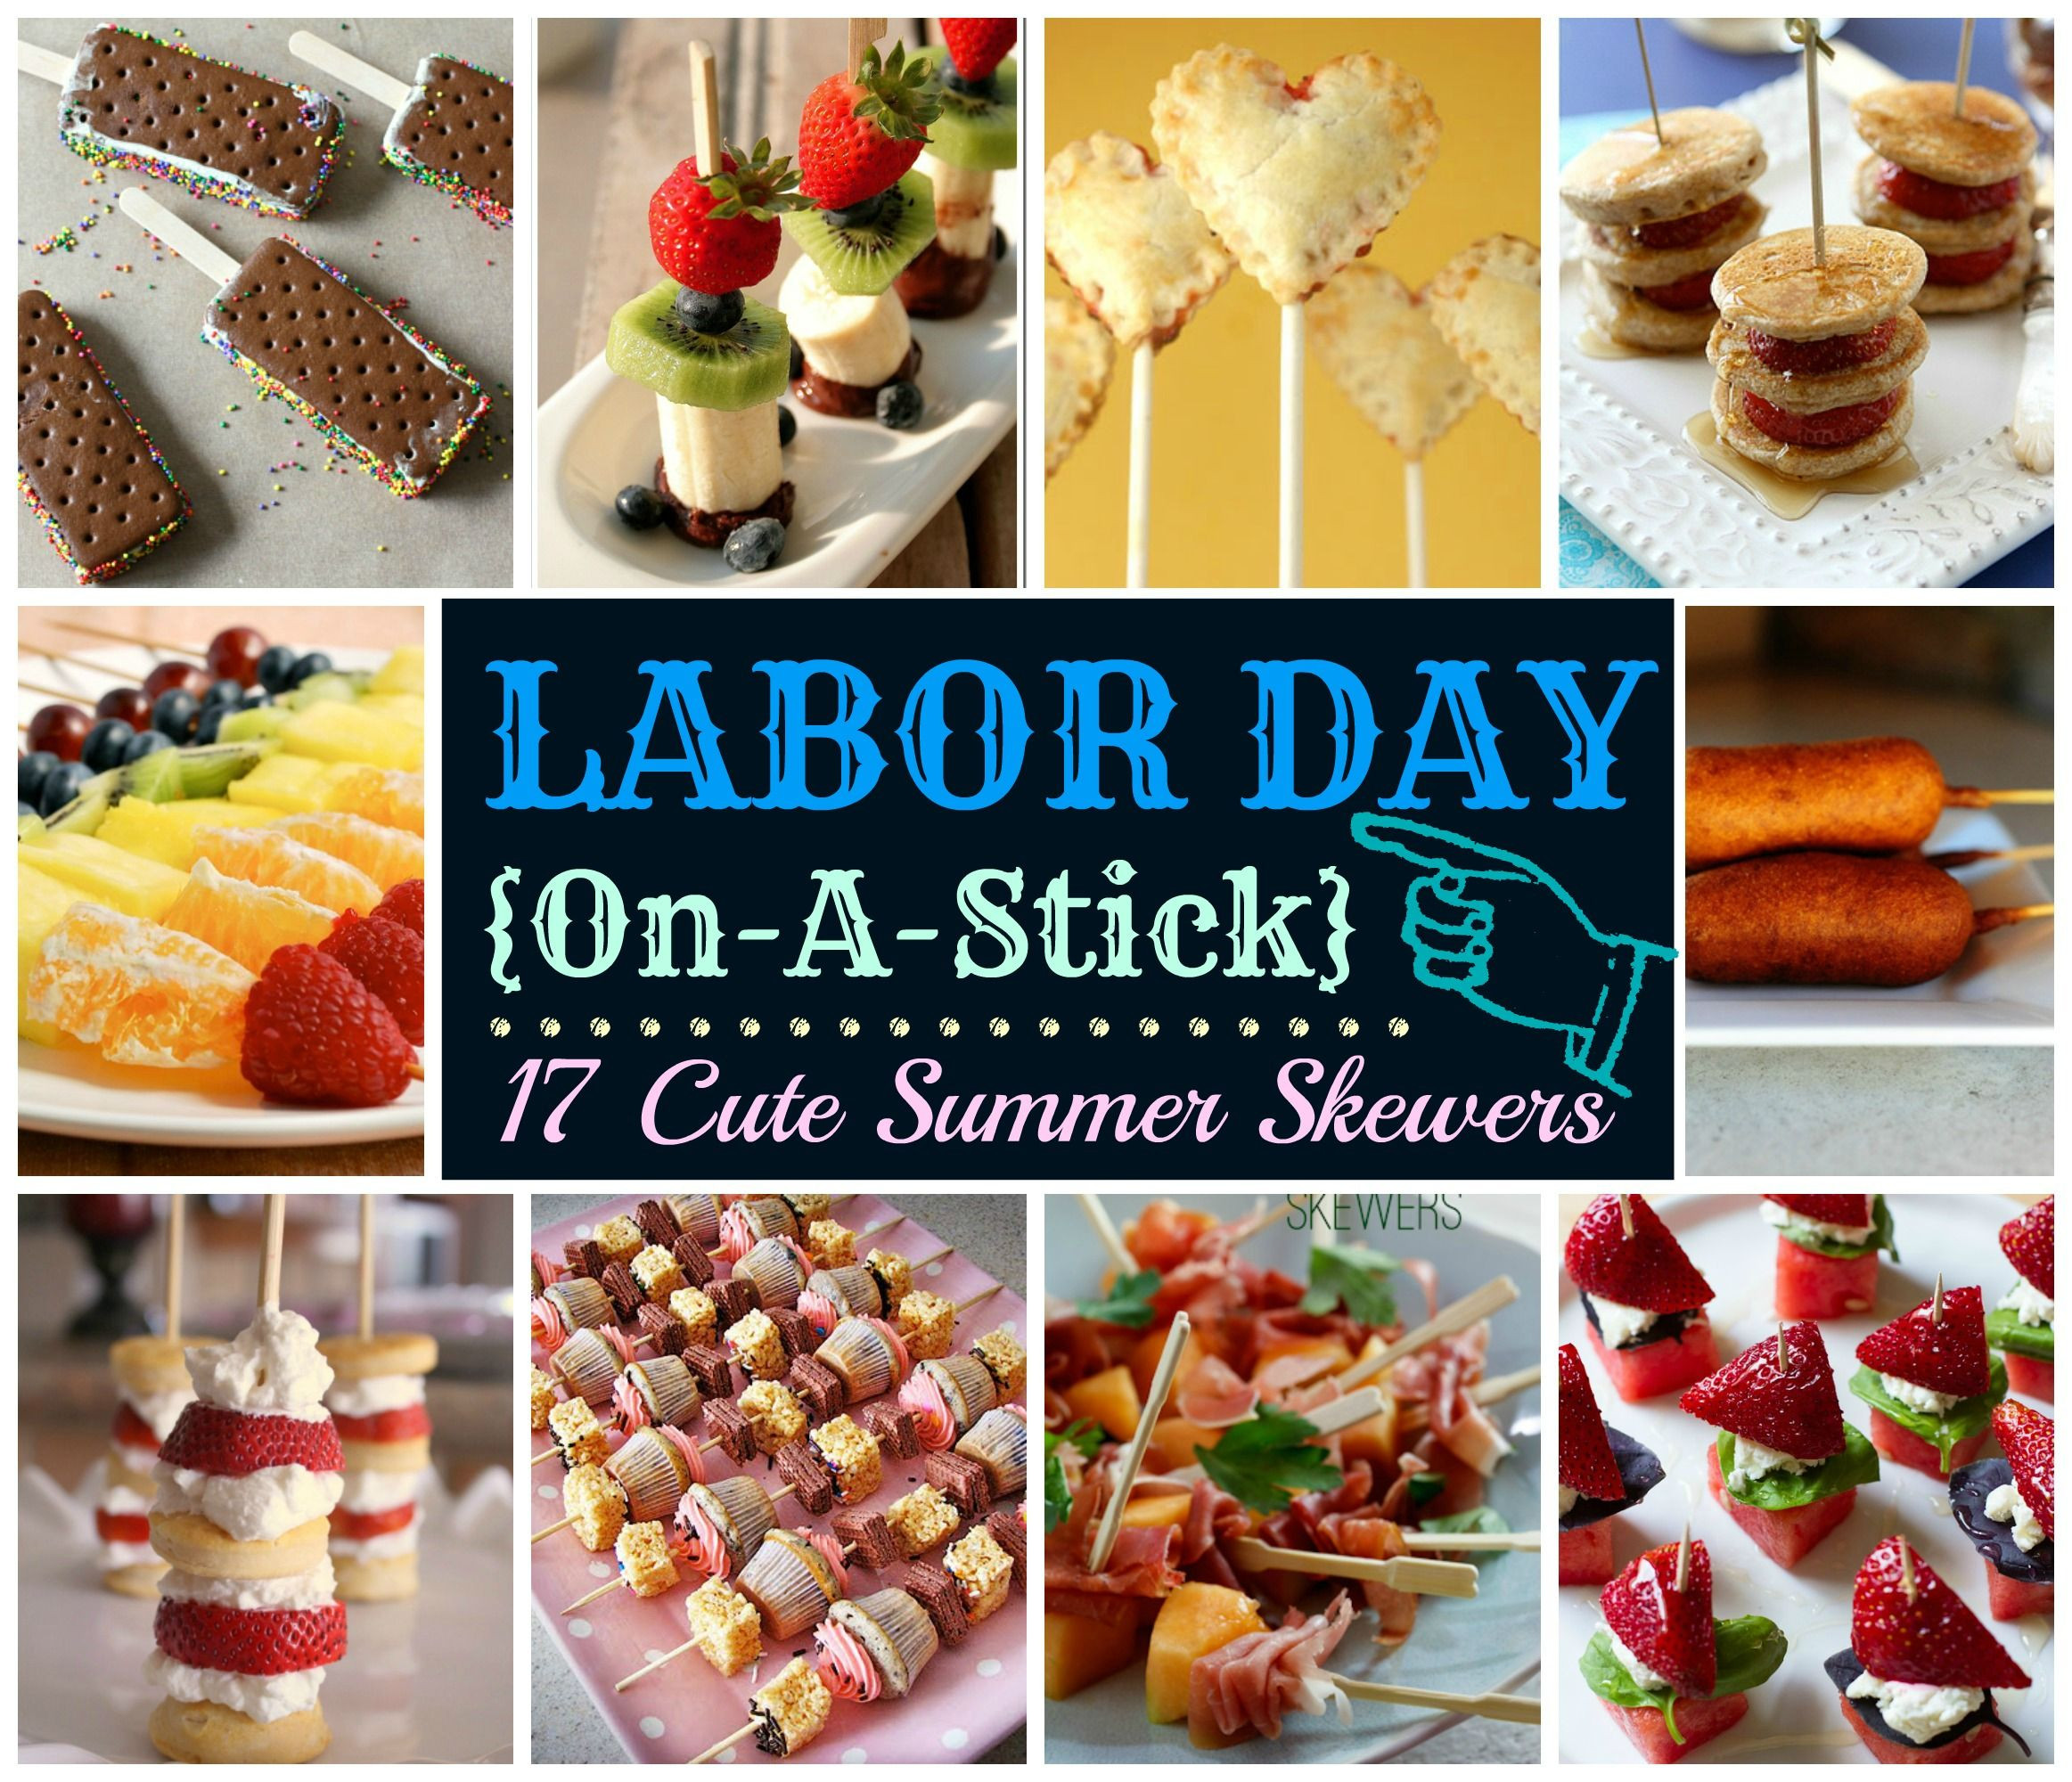 Labor Day Meal Ideas
 Labor Day A Stick 17 Cute Summer Skewers